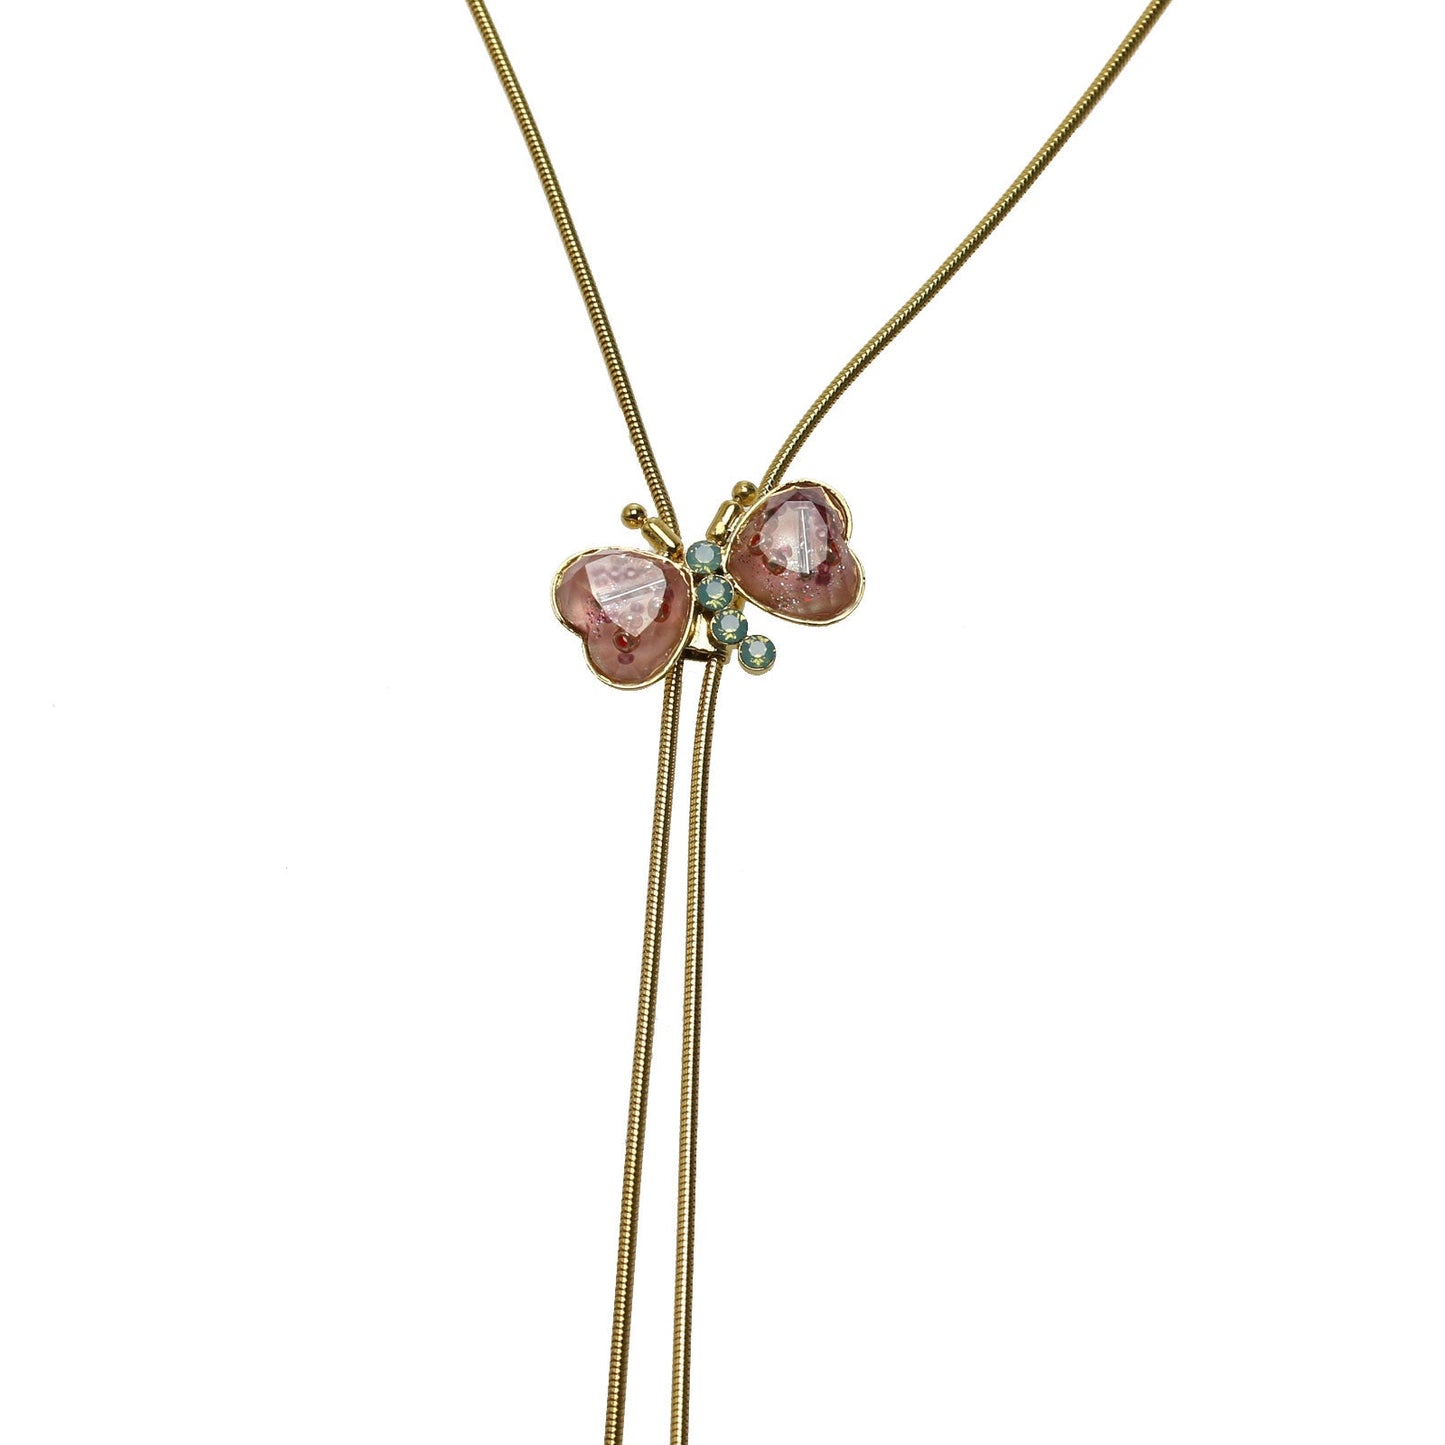 Chain Bolo Tie 24k Necklace Butterfly Pink TAMARUSAN